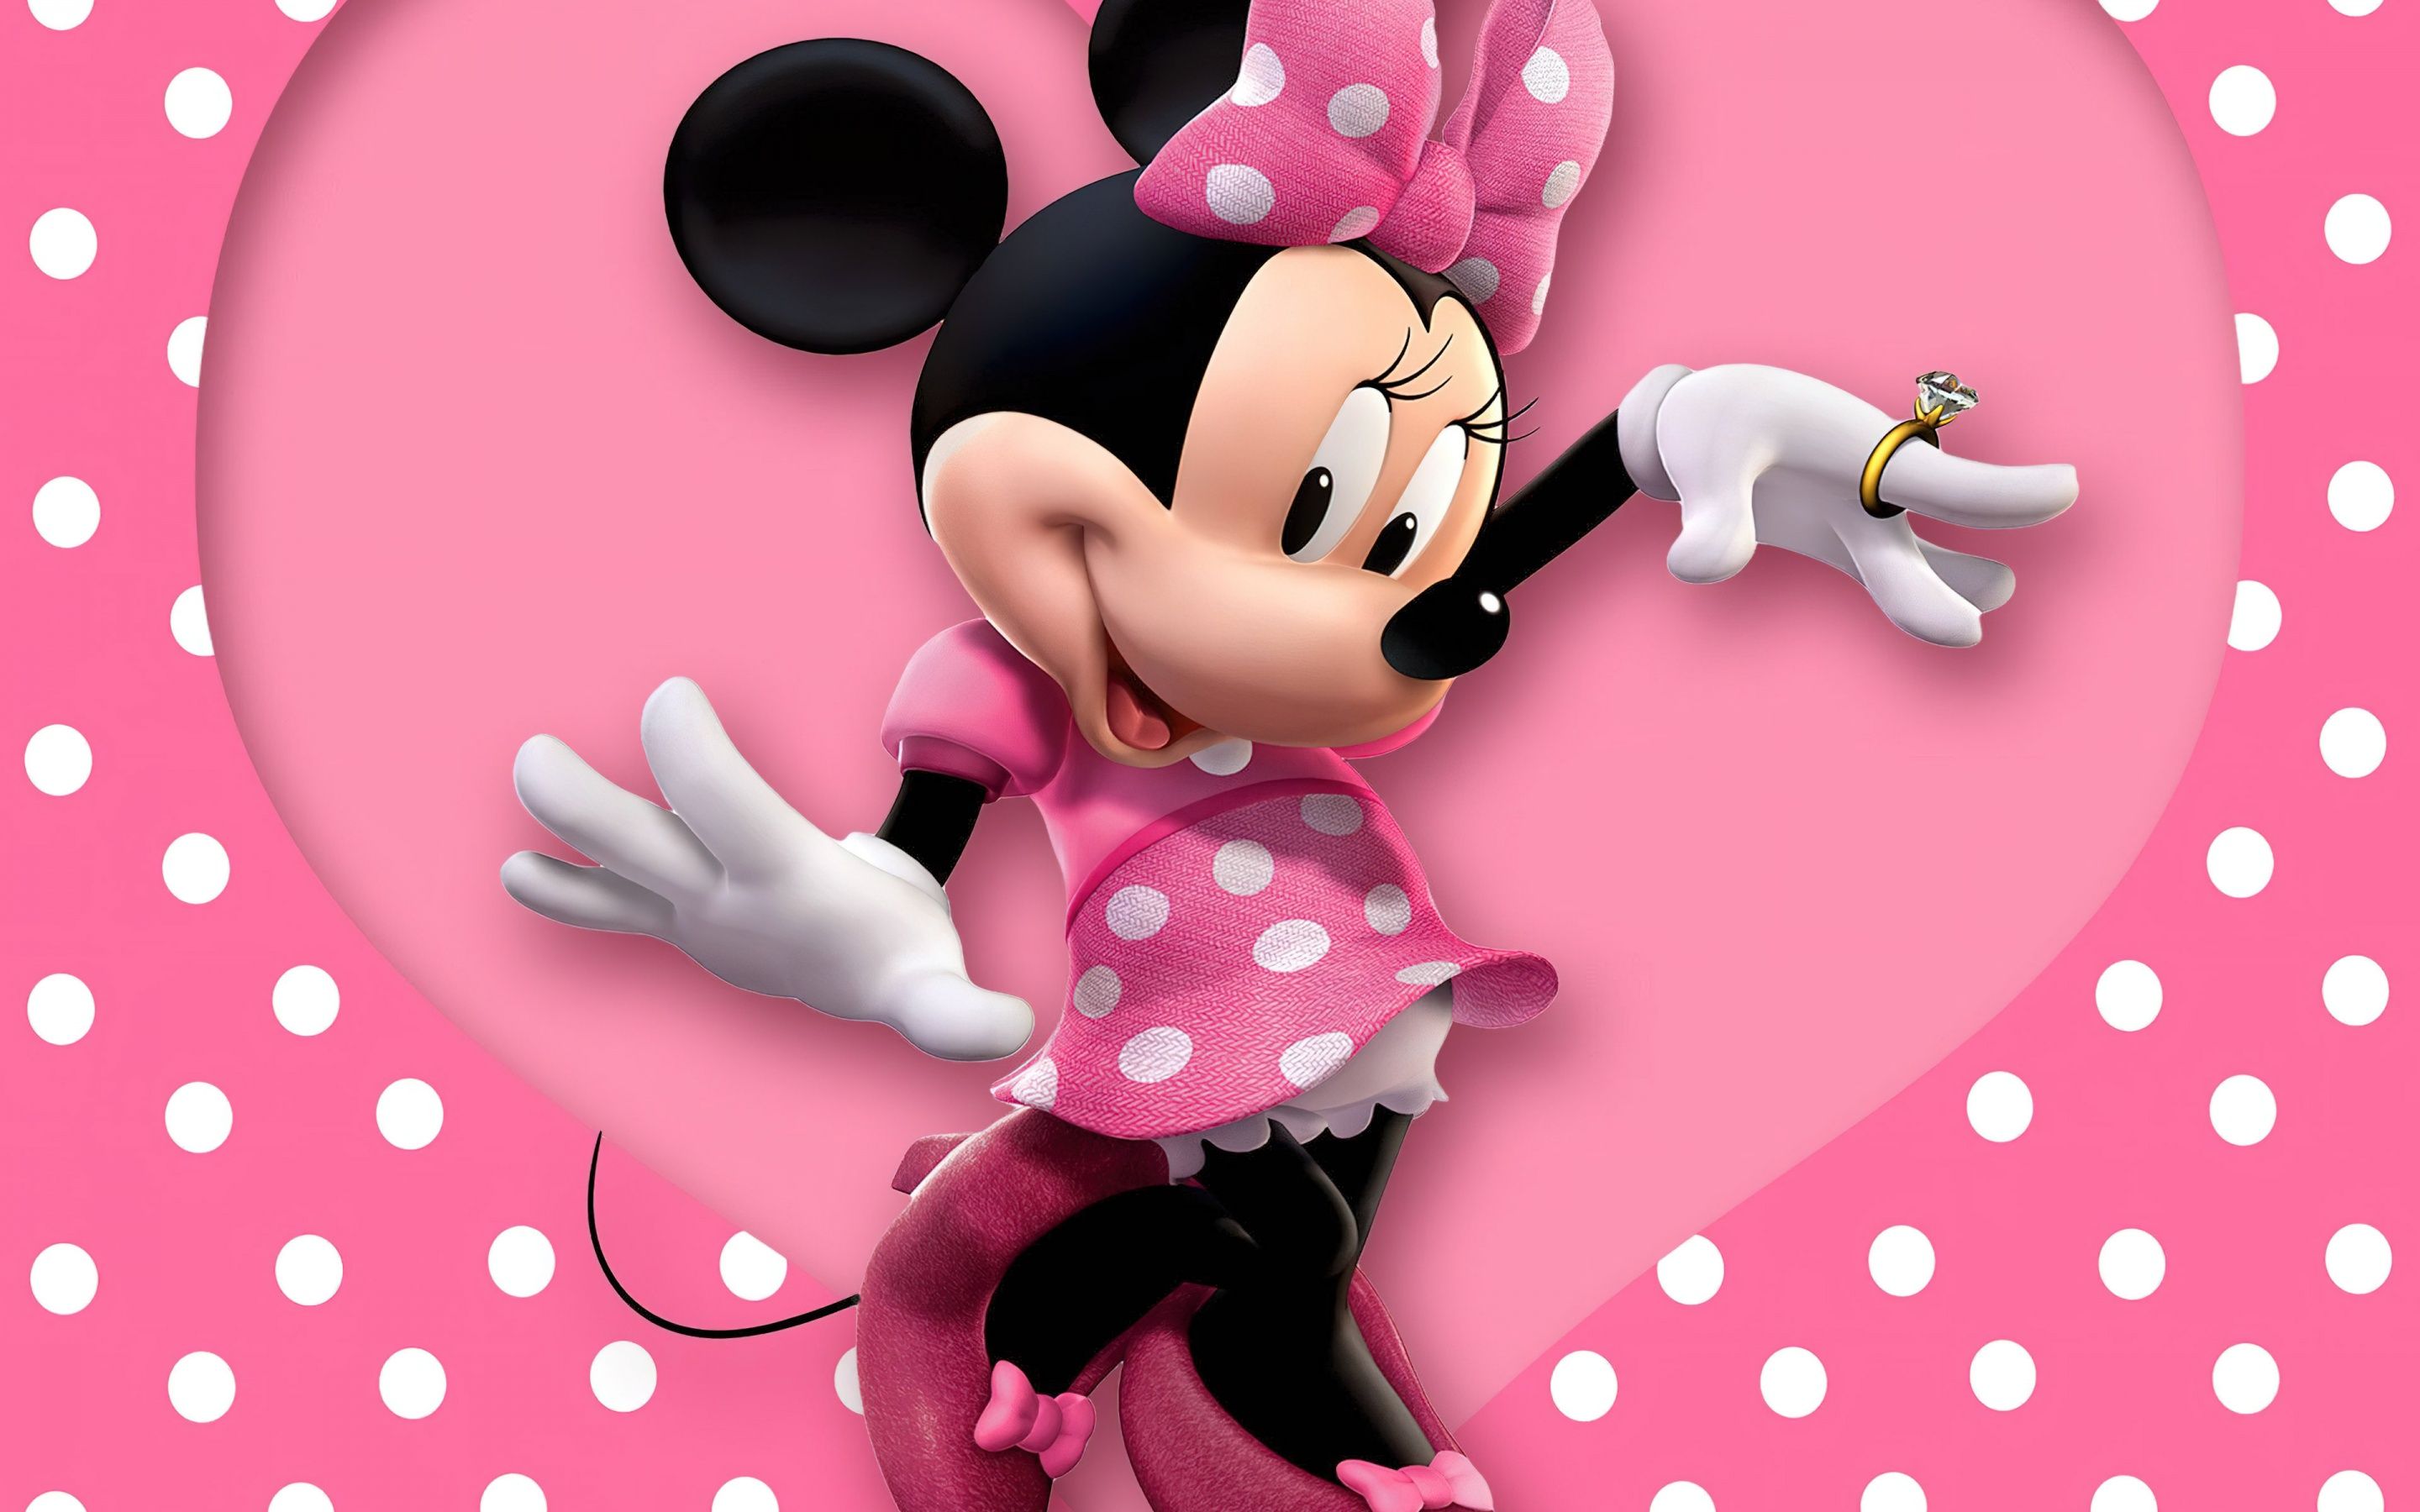 Minnie Mouse wallpaper for your computer - Minnie Mouse